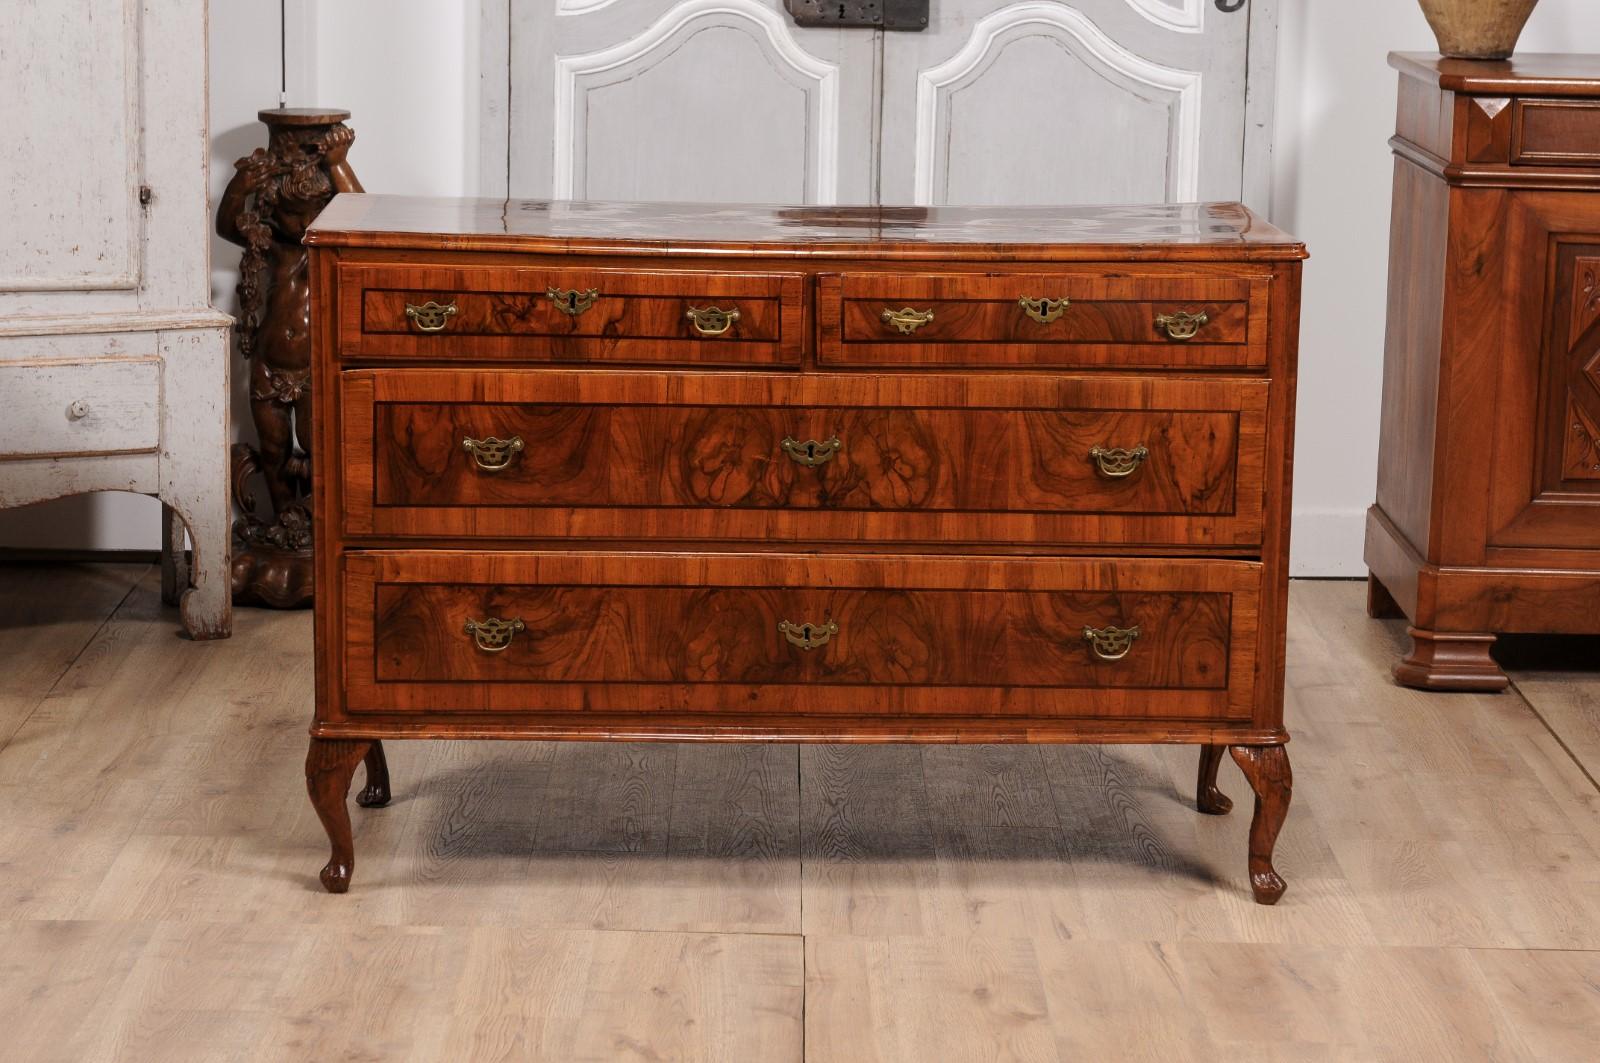 18th Century Venetian Walnut ad Mahogany Commode with Bookmatched Veneer For Sale 7